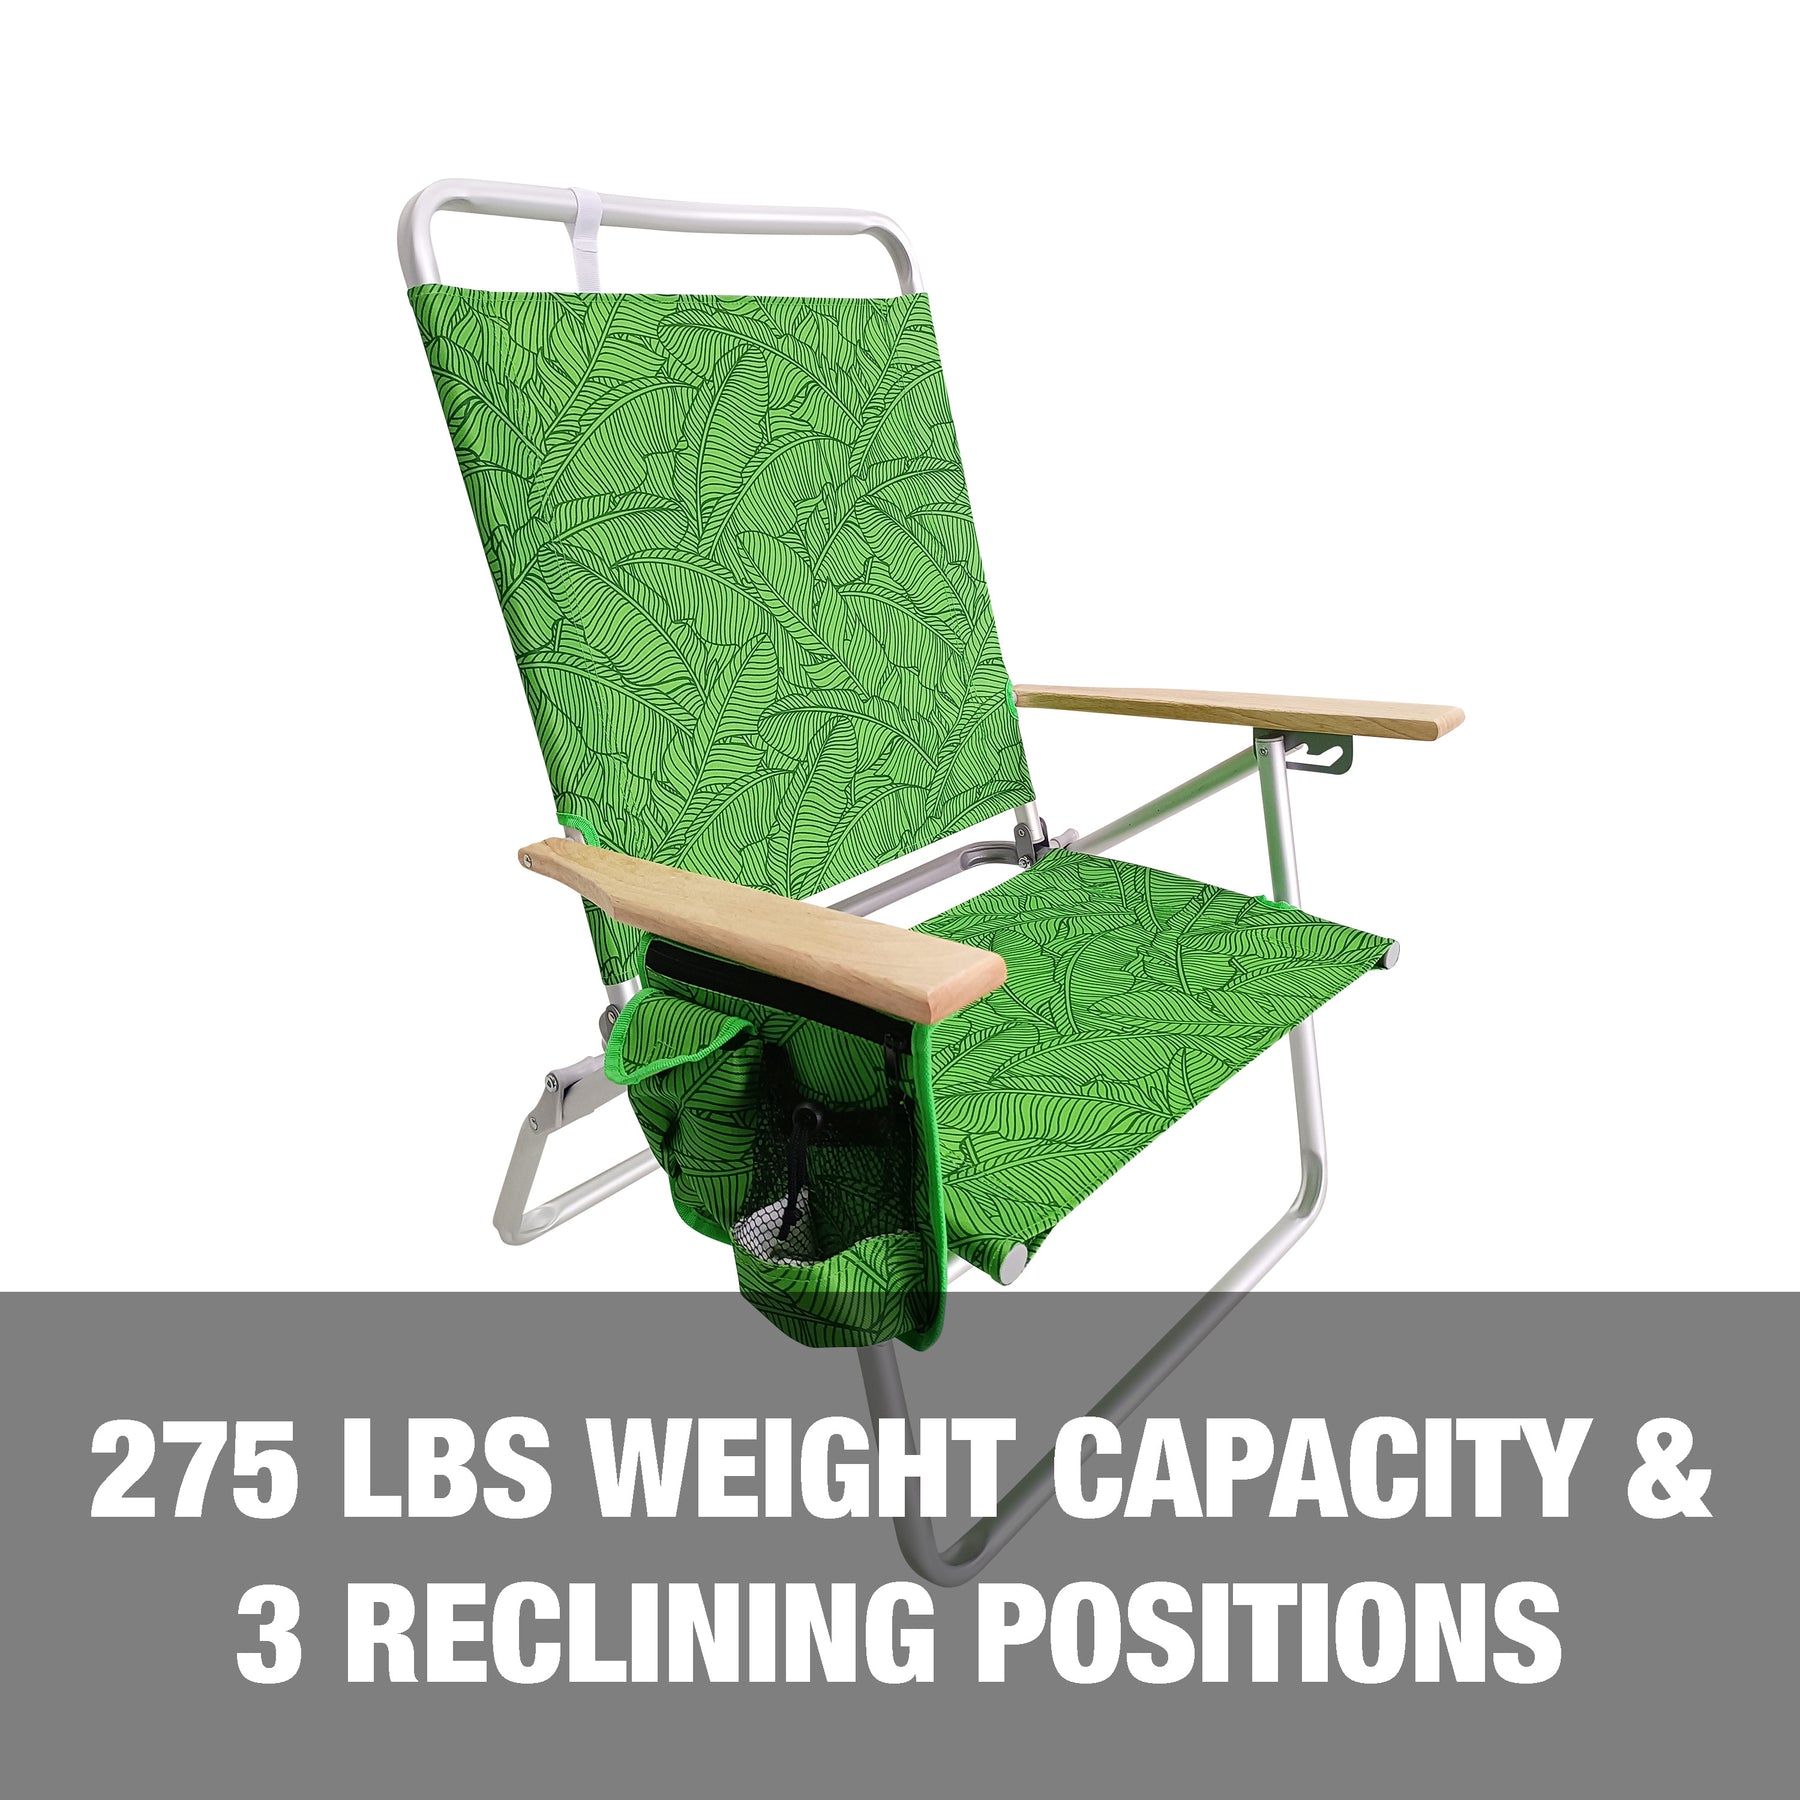 Bliss Hammocks Foldable Beach Chair has a 275 pound weight capacity and 3 reclining positions.